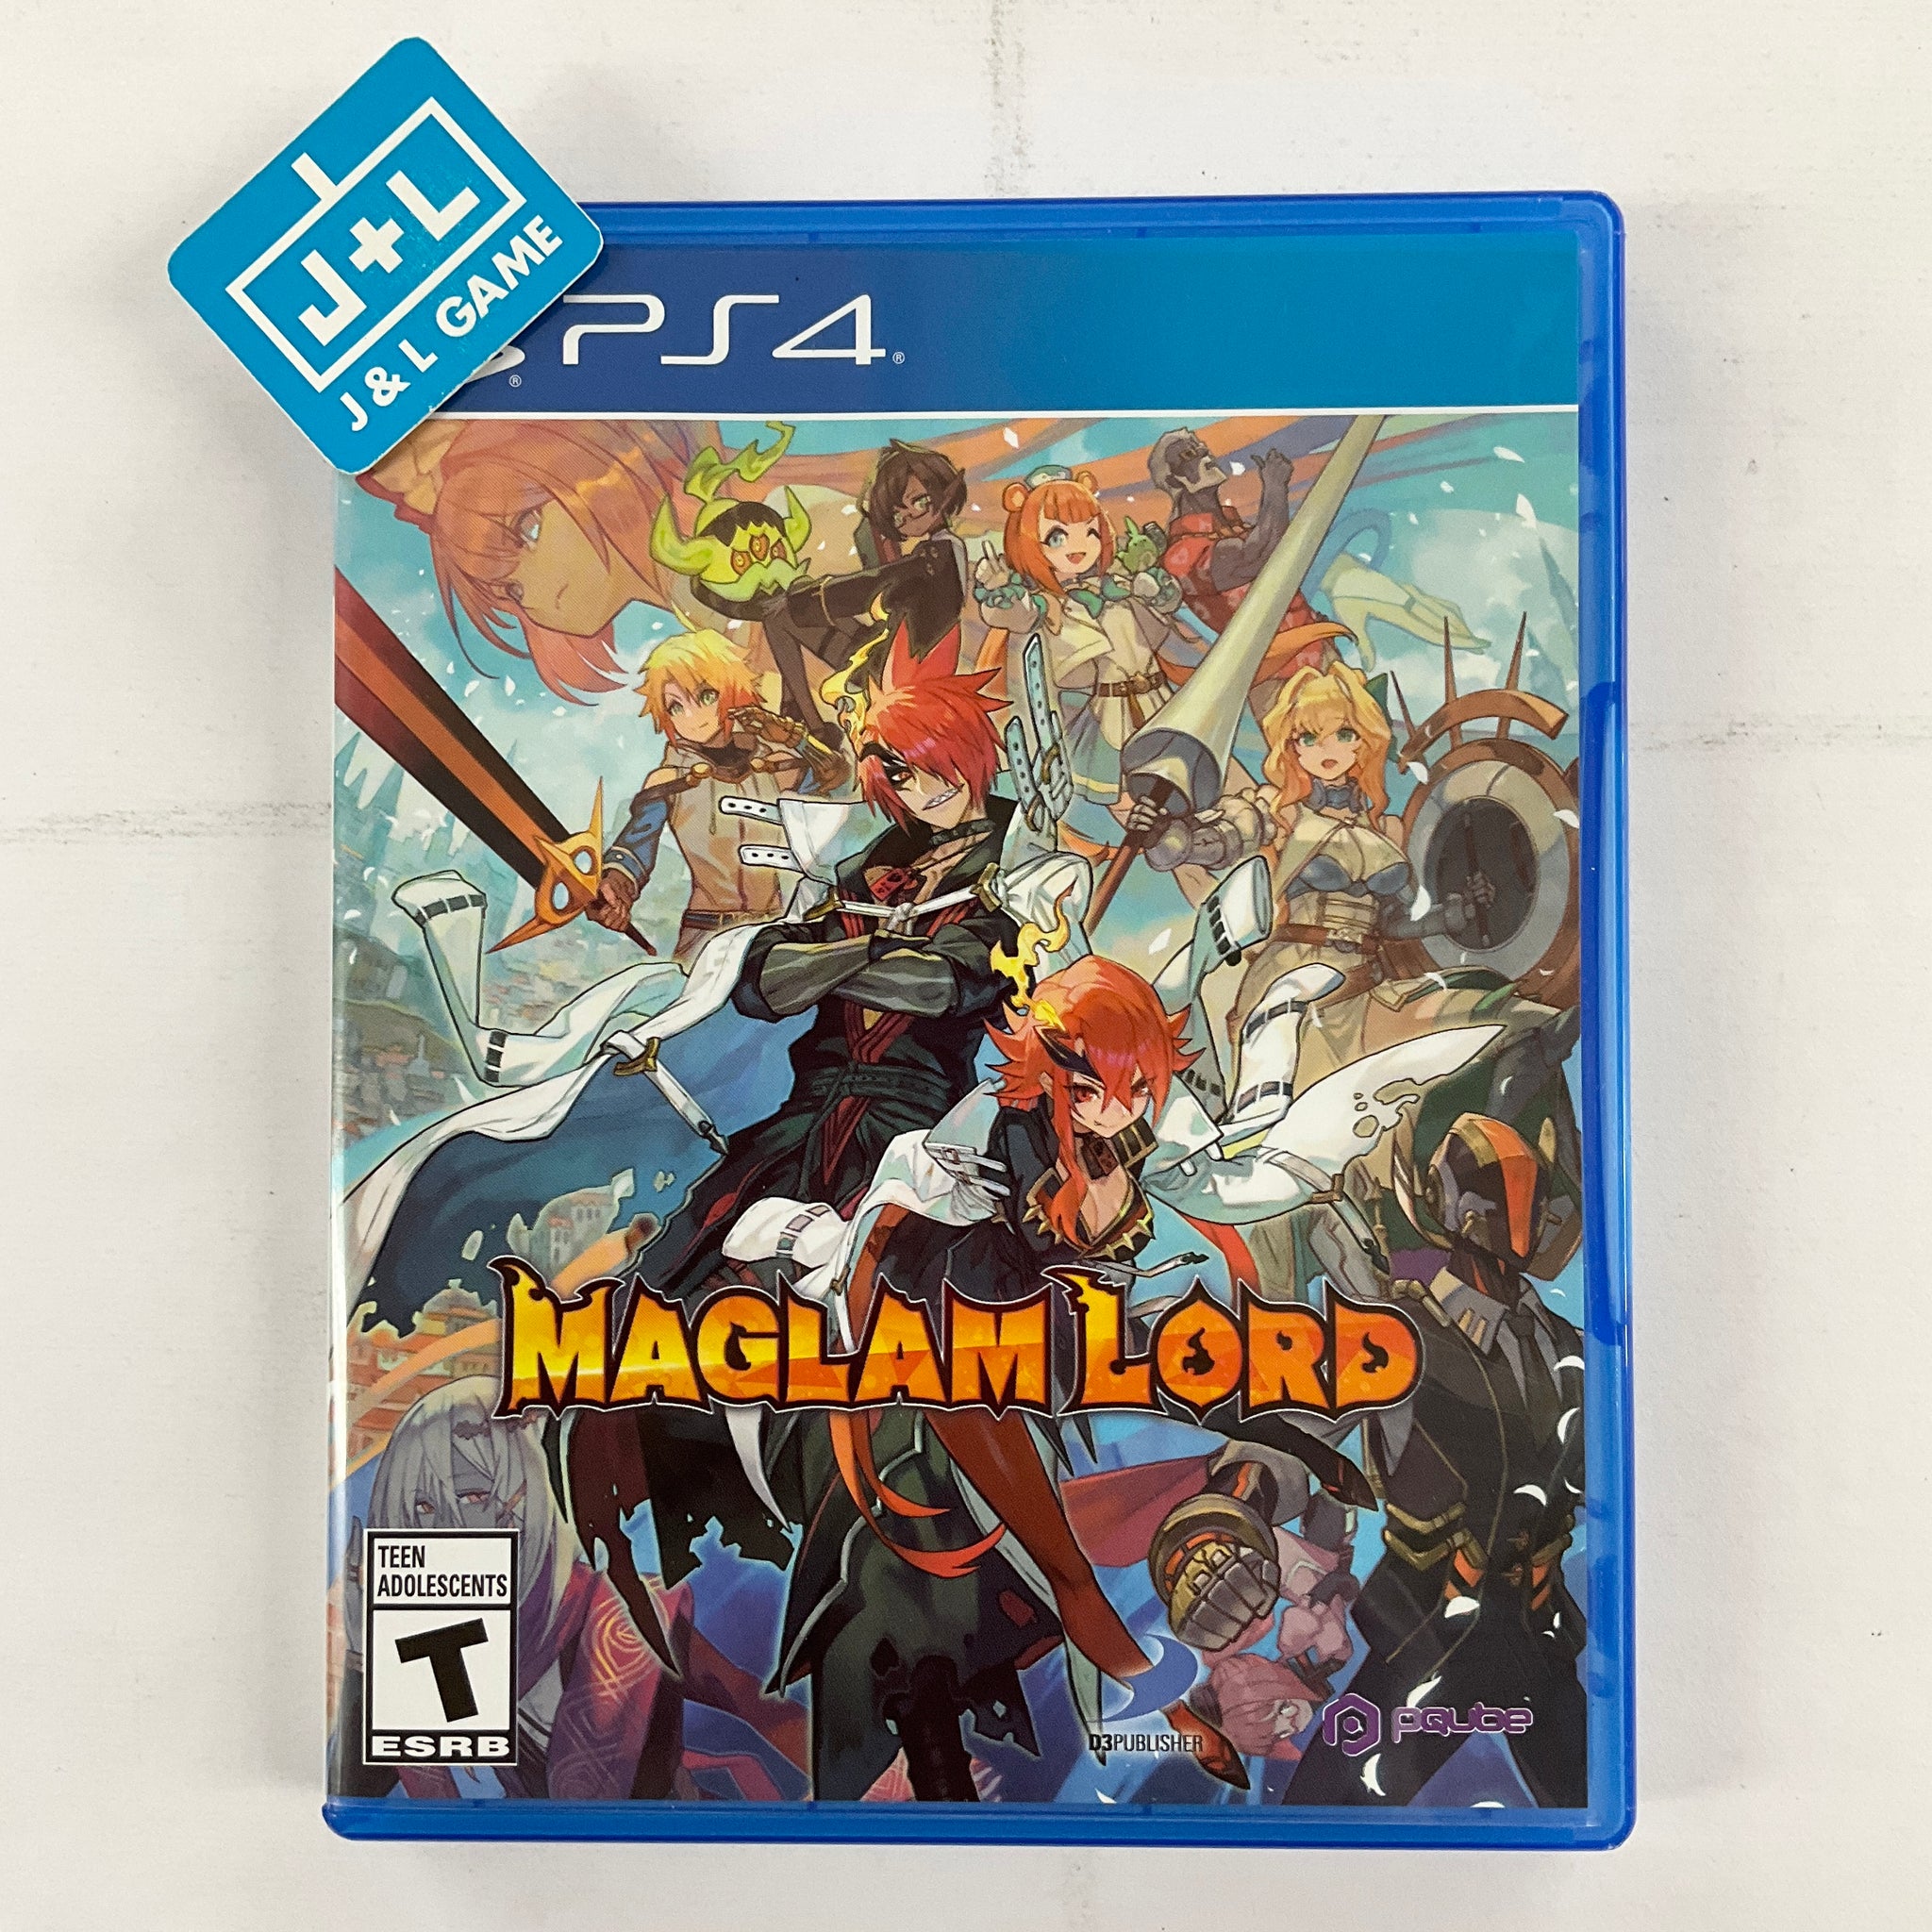 Maglam Lord - (PS4) PlayStation 4 [UNBOXING] Video Games PQube   